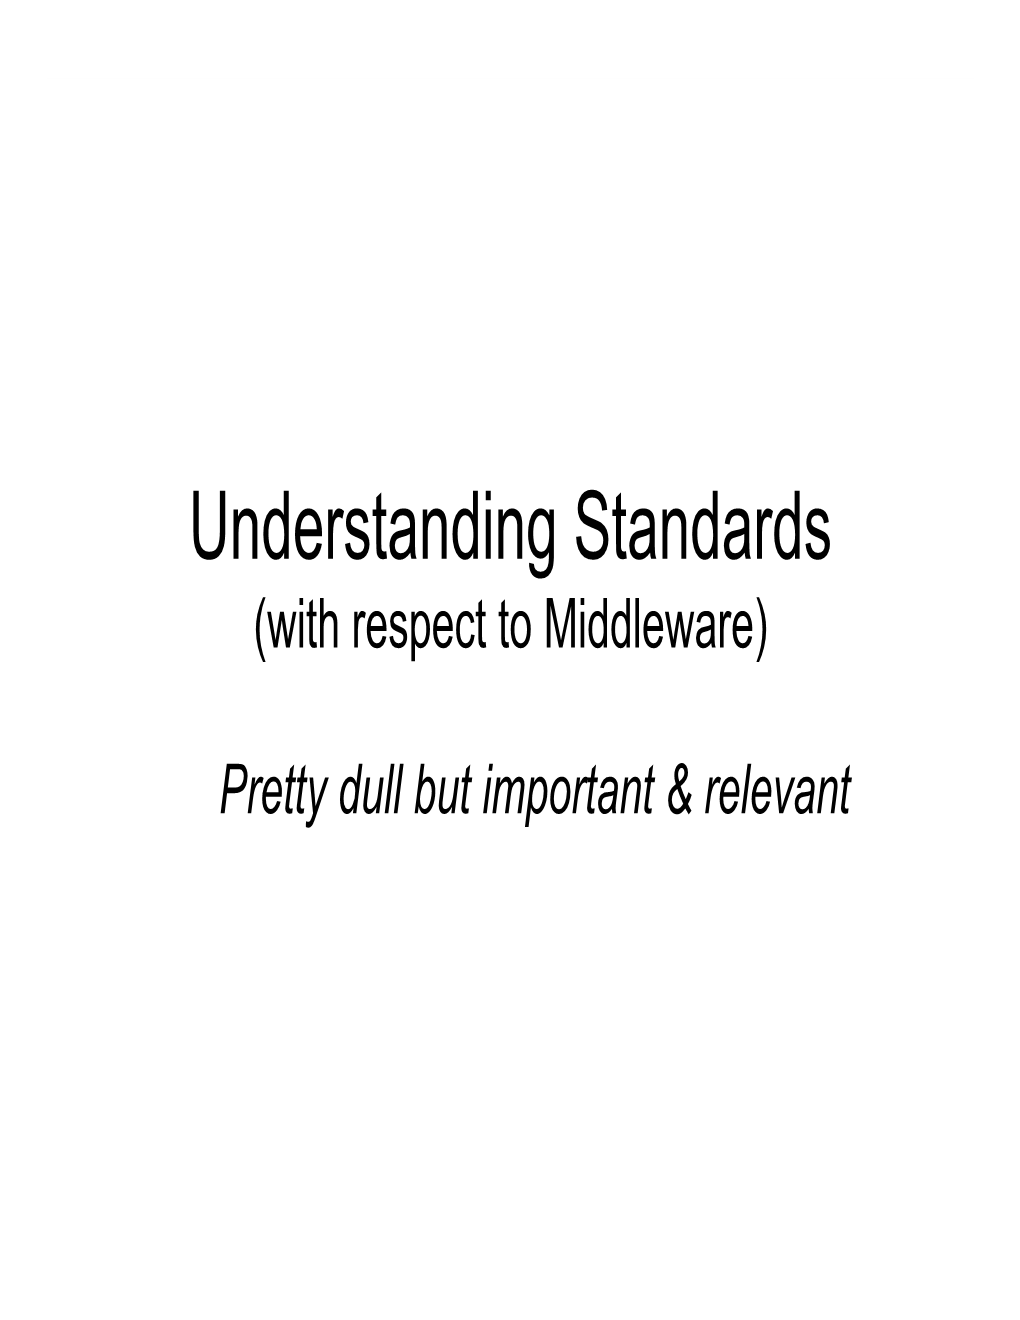 Understanding Standards (With Respect to Middleware)